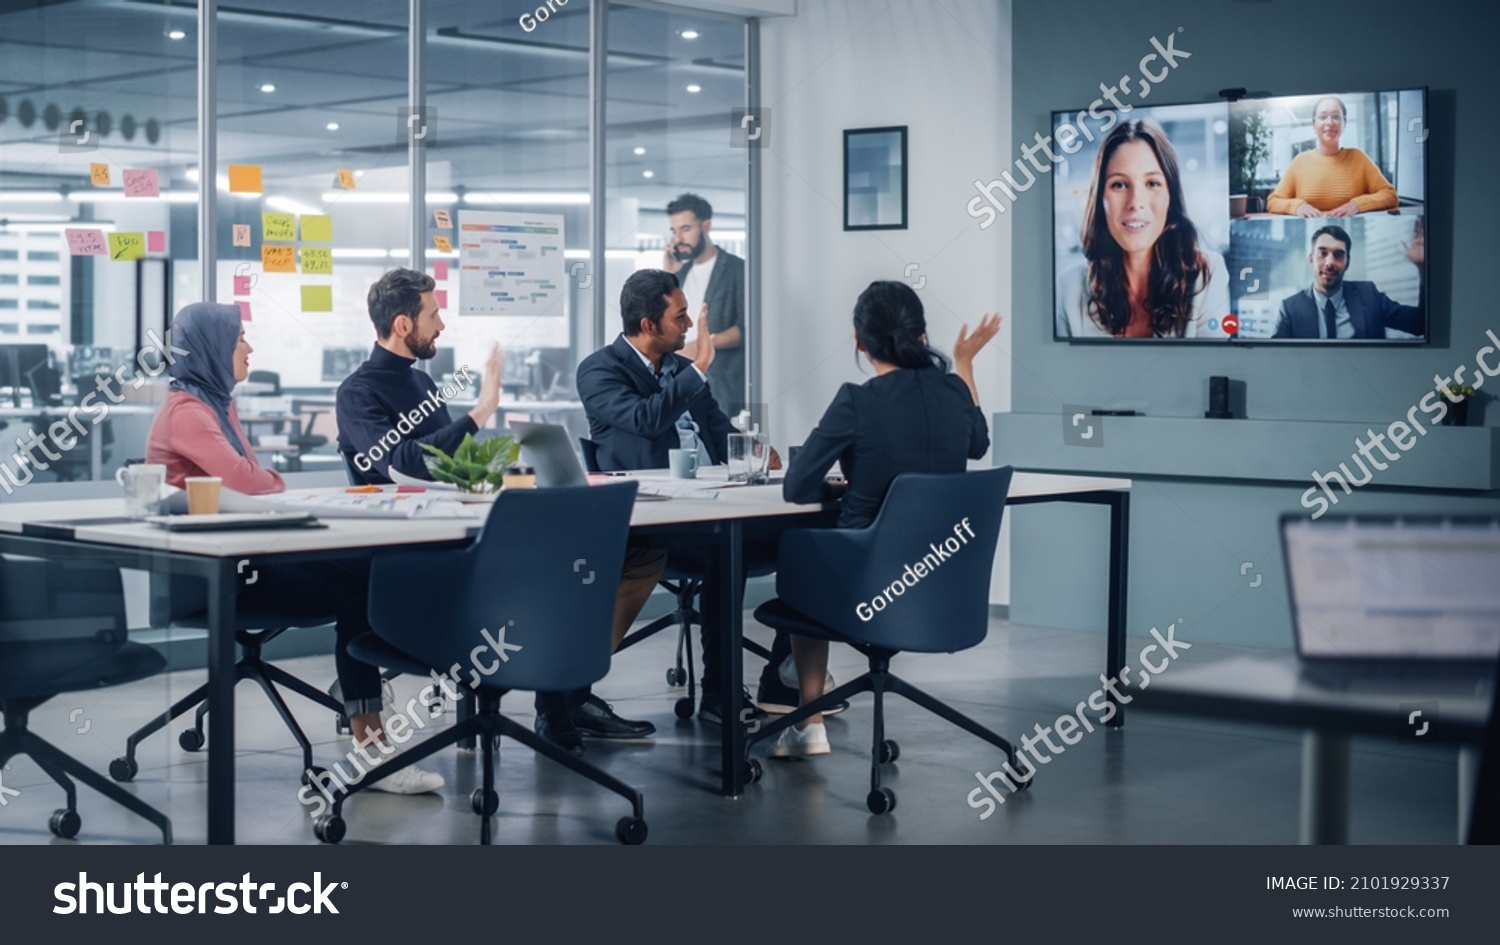 Businesspeople do Video Conference Call with Big Wall TV in Office Meeting Room. Diverse Team of Creative Entrepreneurs at Big Table have Discussion. Specialists work in Digital e-Commerce Startup #2101929337